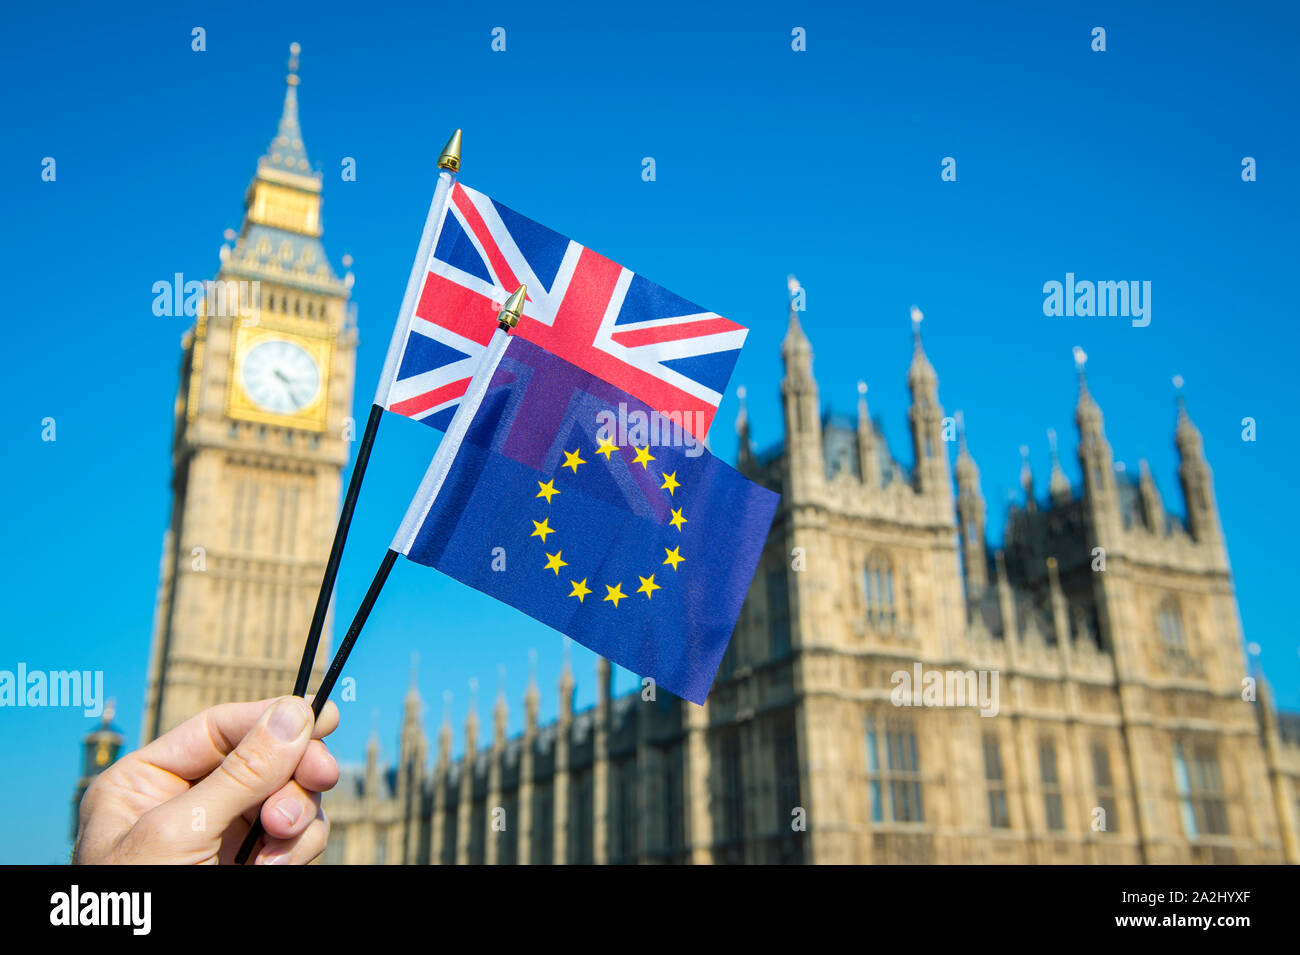 Hand waving European Union and British Union Jack flag in front of Big Ben and the Houses of Parliament at Westminster Palace, London, UK for Brexit Stock Photo